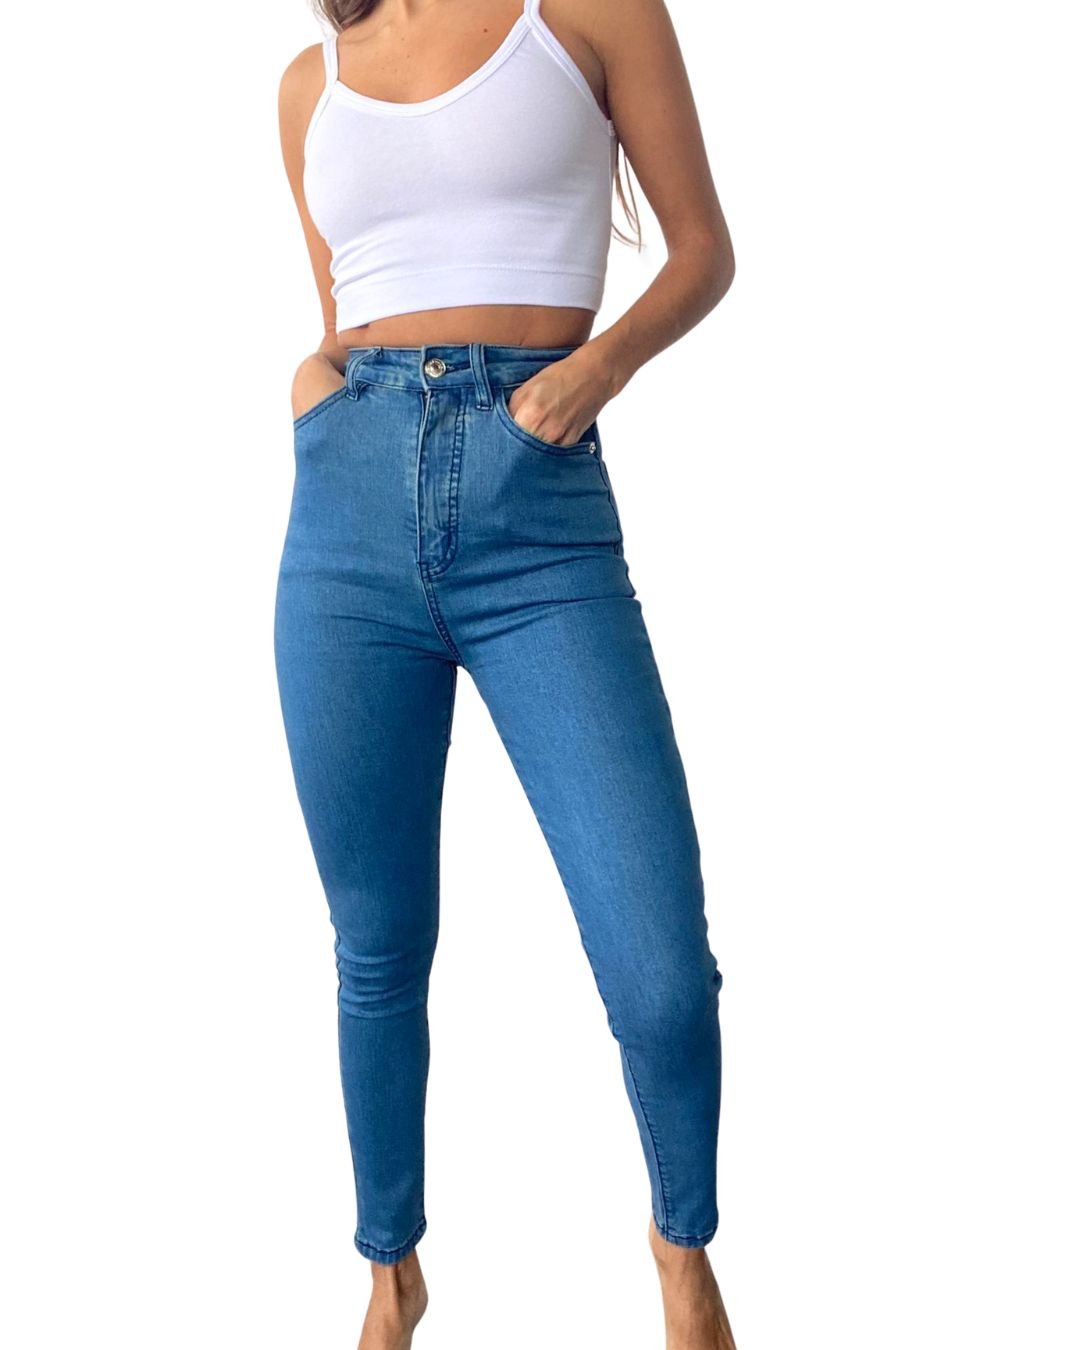 Kehen Plus Size Women's Slimming Skinny Jeans Juniors Girl Basic Stretchy  Fit Skinny Denim Pants Blue X-Large at  Women's Jeans store